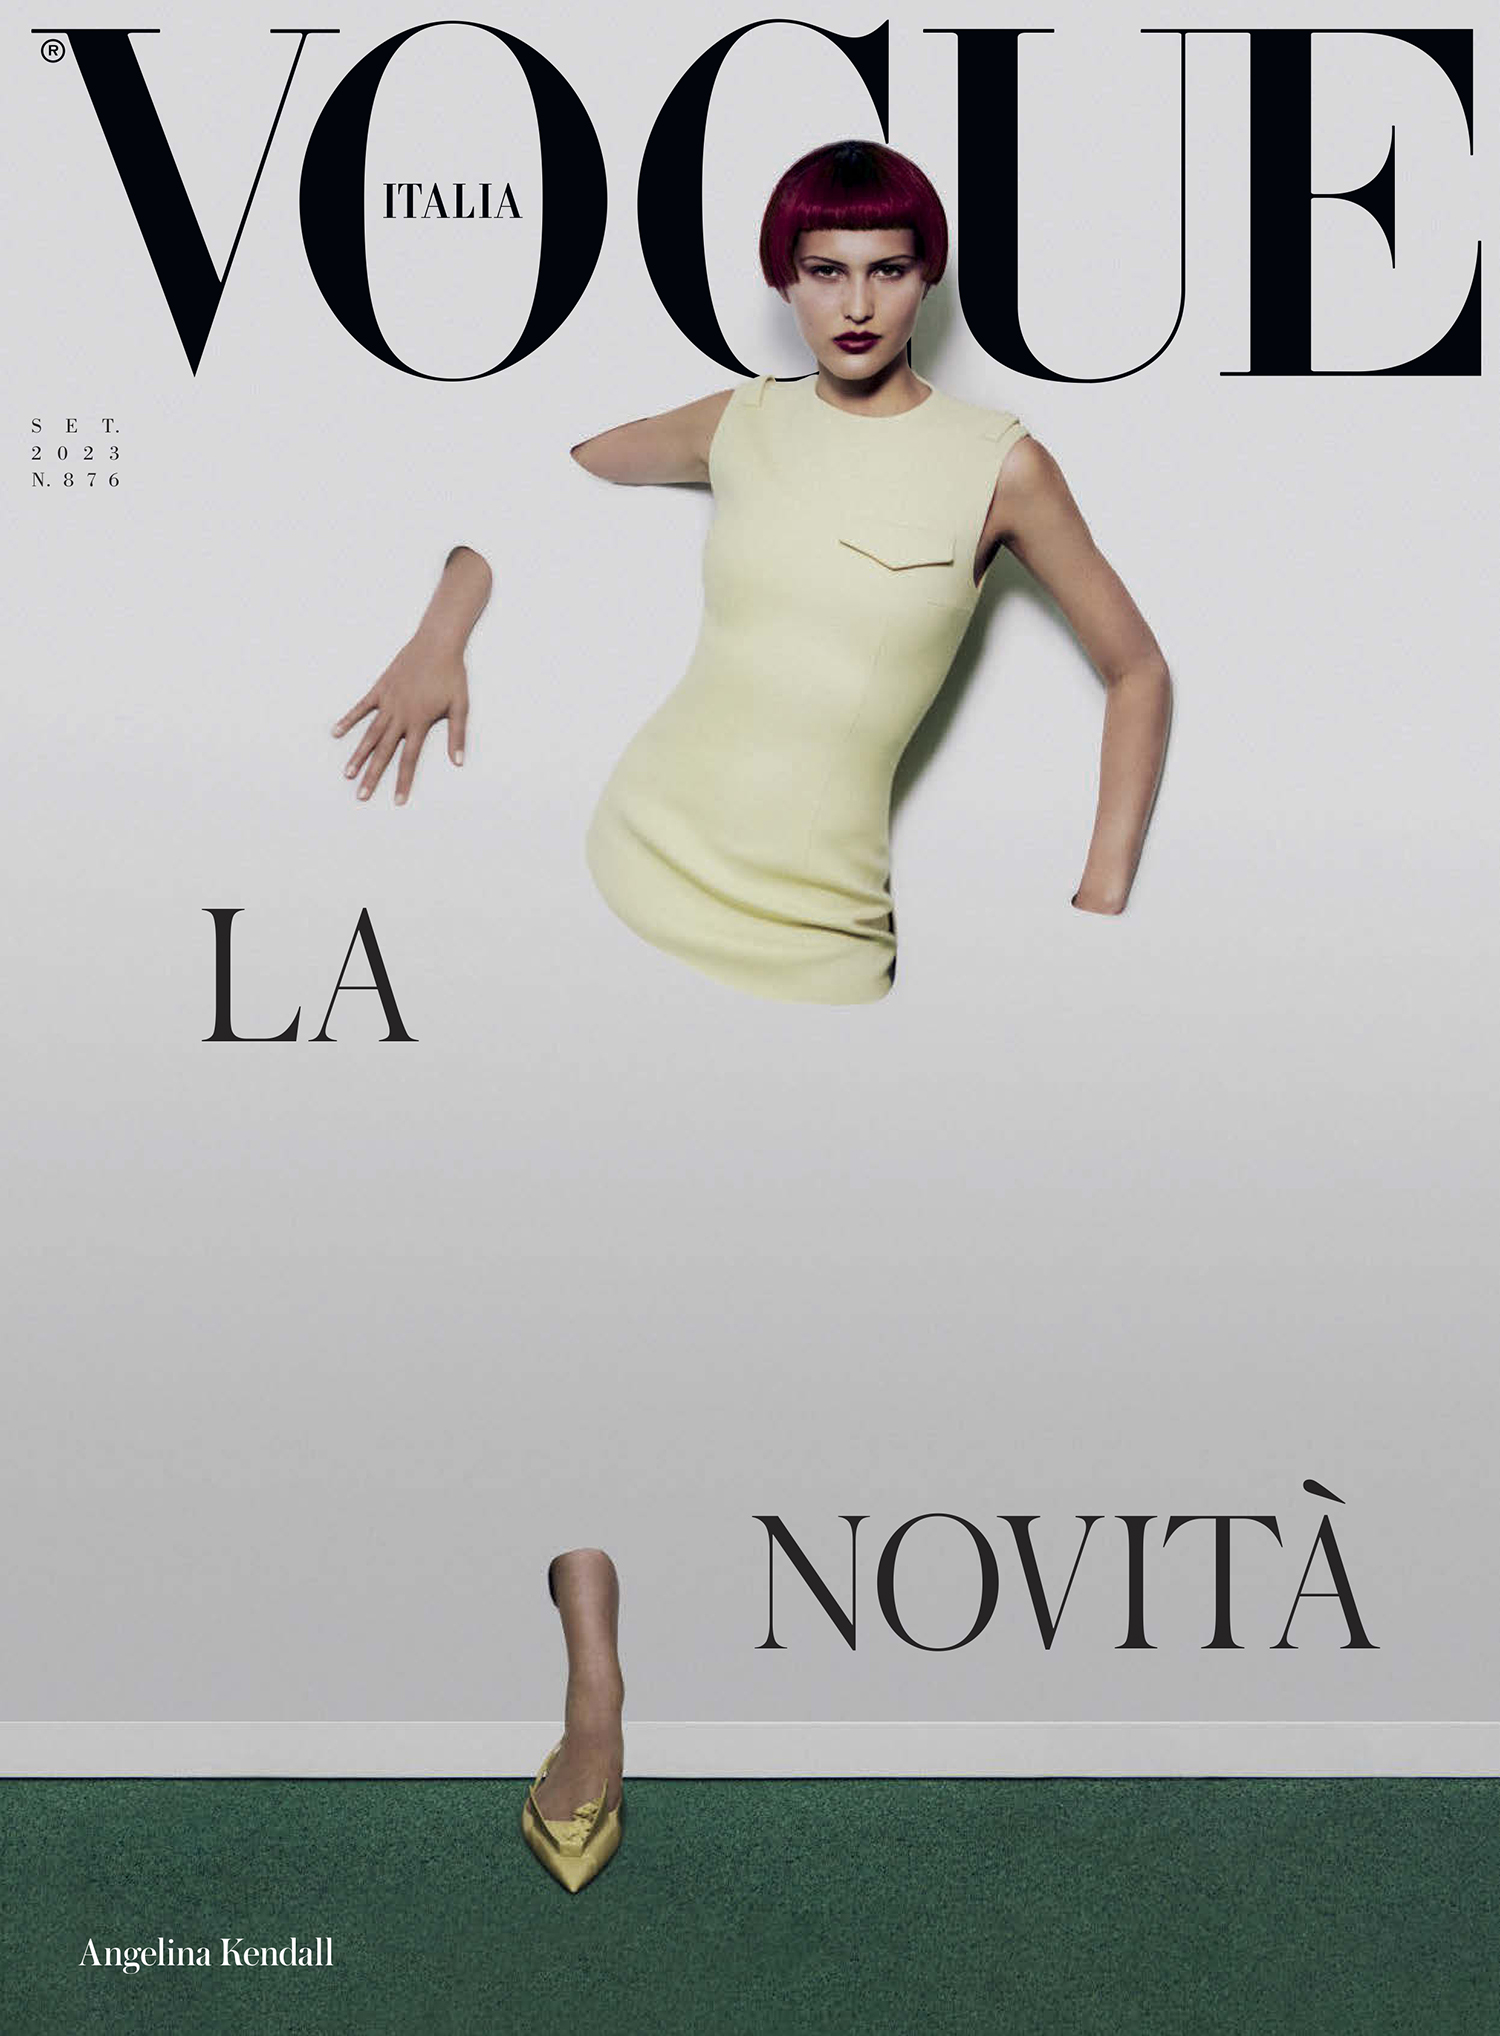 Angelina Kendall covers Vogue Italia September 2023 by Carlijn Jacobs